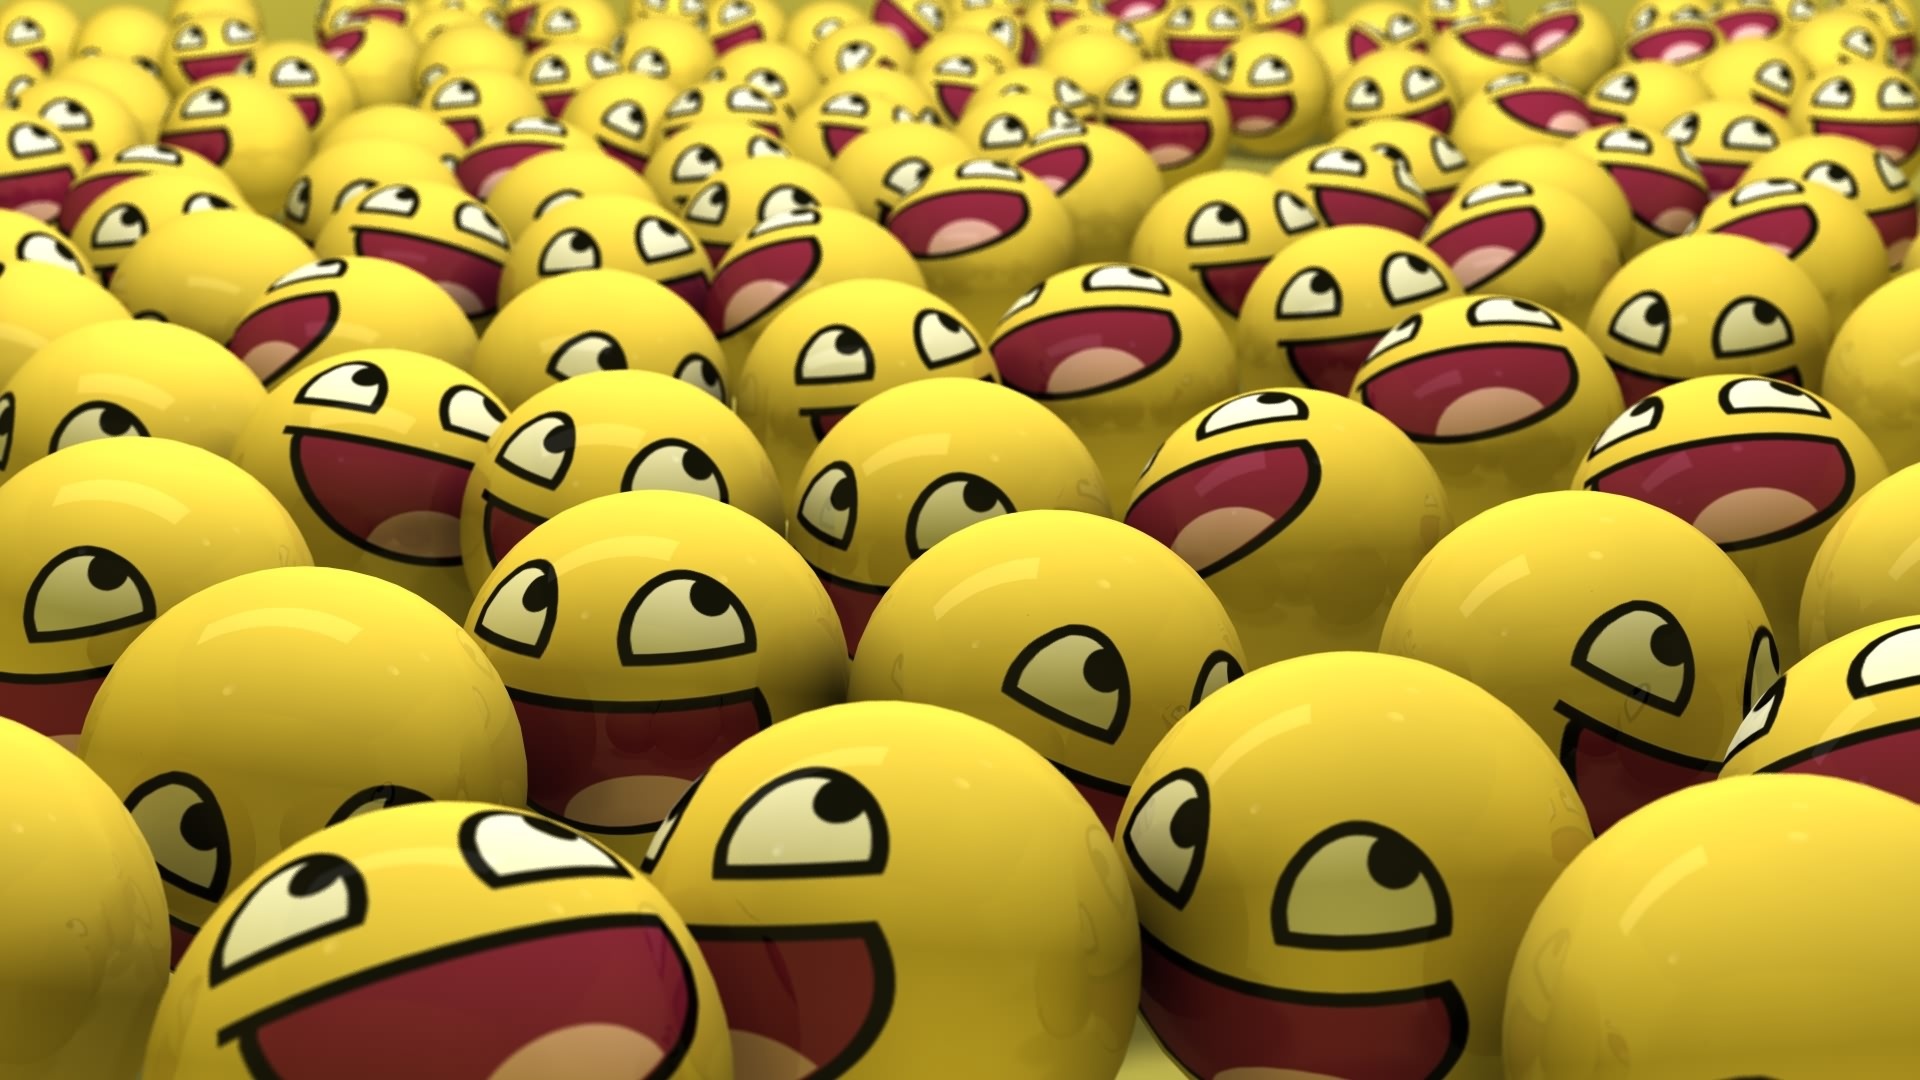 Free Happy Faces Images Download Free Clip Art Free Clip Art on